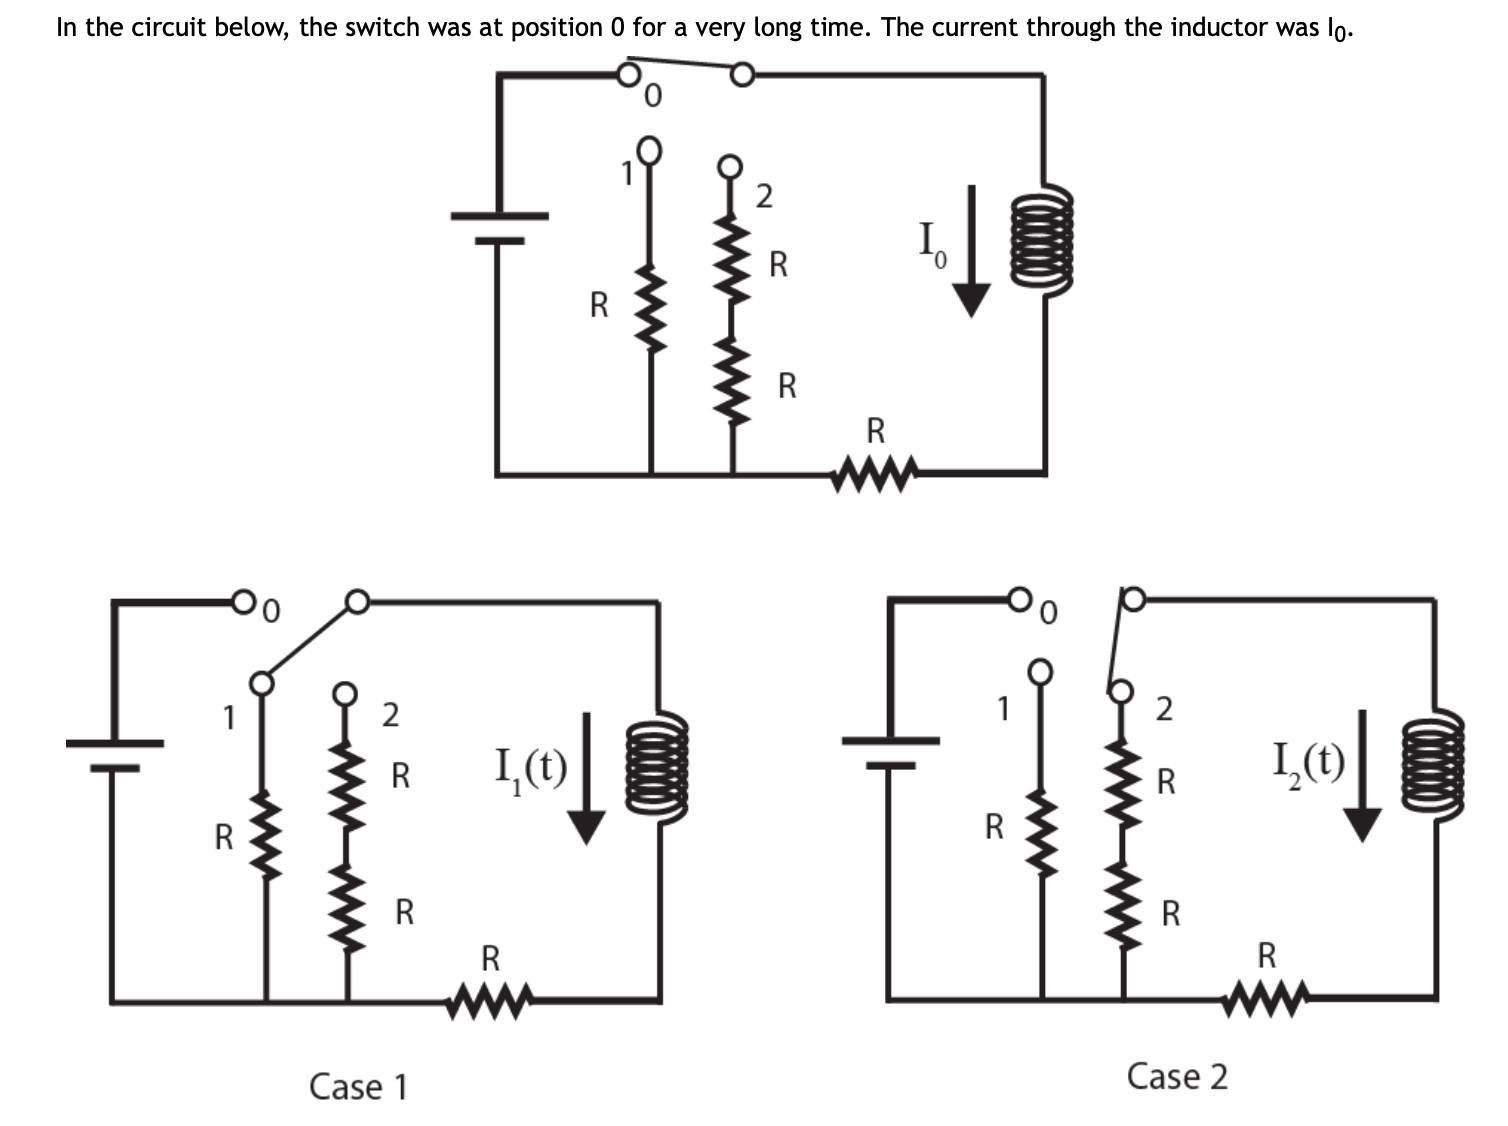 In the circuit below, the switch was at position 0 for a very long time. The current through the inductor was lo.
R
1
1
I,(1)
I,(1)
R
Case 1
Case 2
00000
2.
wwwwo
